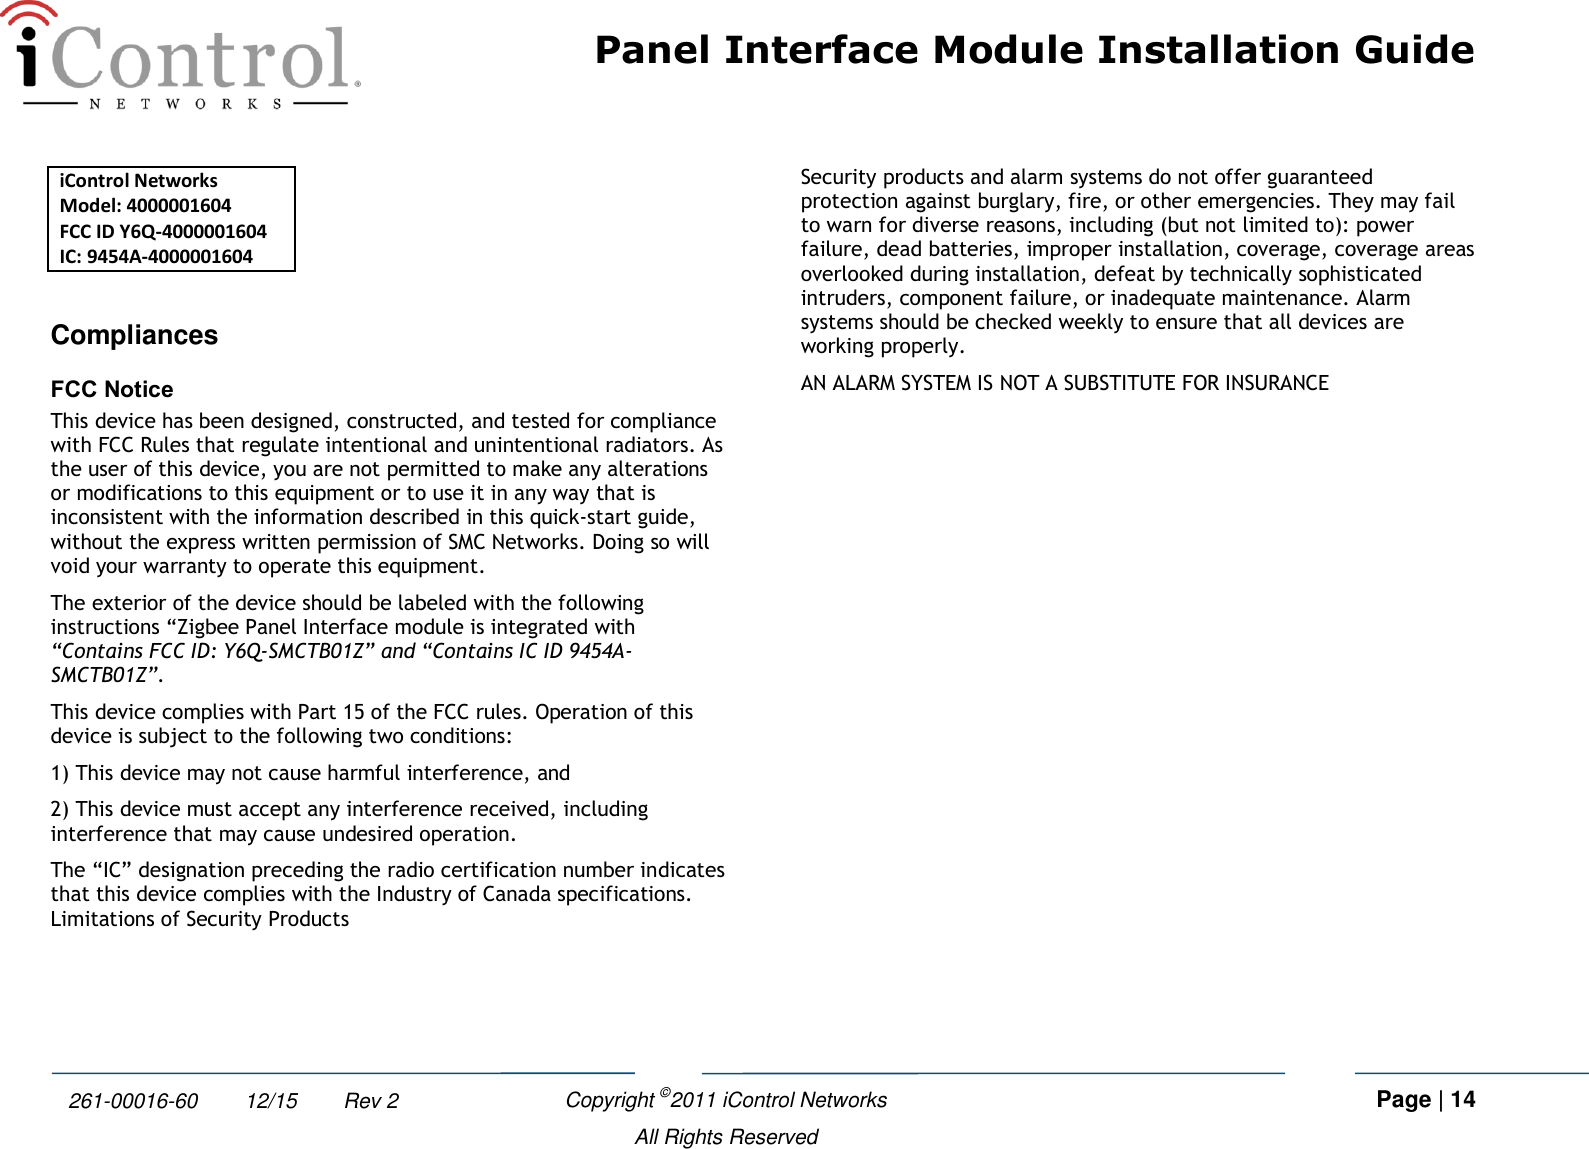 Panel Interface Module Installation Guide    Copyright ©2011 iControl Networks   Page | 14  All Rights Reserved 261-00016-60        12/15        Rev 2 iControl Networks Model: 4000001604 FCC ID Y6Q-4000001604 IC: 9454A-4000001604   Compliances FCC Notice This device has been designed, constructed, and tested for compliance with FCC Rules that regulate intentional and unintentional radiators. As the user of this device, you are not permitted to make any alterations or modifications to this equipment or to use it in any way that is inconsistent with the information described in this quick-start guide, without the express written permission of SMC Networks. Doing so will void your warranty to operate this equipment. The exterior of the device should be labeled with the following instructions “Zigbee Panel Interface module is integrated with “Contains FCC ID: Y6Q-SMCTB01Z” and “Contains IC ID 9454A-SMCTB01Z”. This device complies with Part 15 of the FCC rules. Operation of this device is subject to the following two conditions:  1) This device may not cause harmful interference, and  2) This device must accept any interference received, including interference that may cause undesired operation. The “IC” designation preceding the radio certification number indicates that this device complies with the Industry of Canada specifications. Limitations of Security Products Security products and alarm systems do not offer guaranteed protection against burglary, fire, or other emergencies. They may fail to warn for diverse reasons, including (but not limited to): power failure, dead batteries, improper installation, coverage, coverage areas overlooked during installation, defeat by technically sophisticated intruders, component failure, or inadequate maintenance. Alarm systems should be checked weekly to ensure that all devices are working properly.  AN ALARM SYSTEM IS NOT A SUBSTITUTE FOR INSURANCE